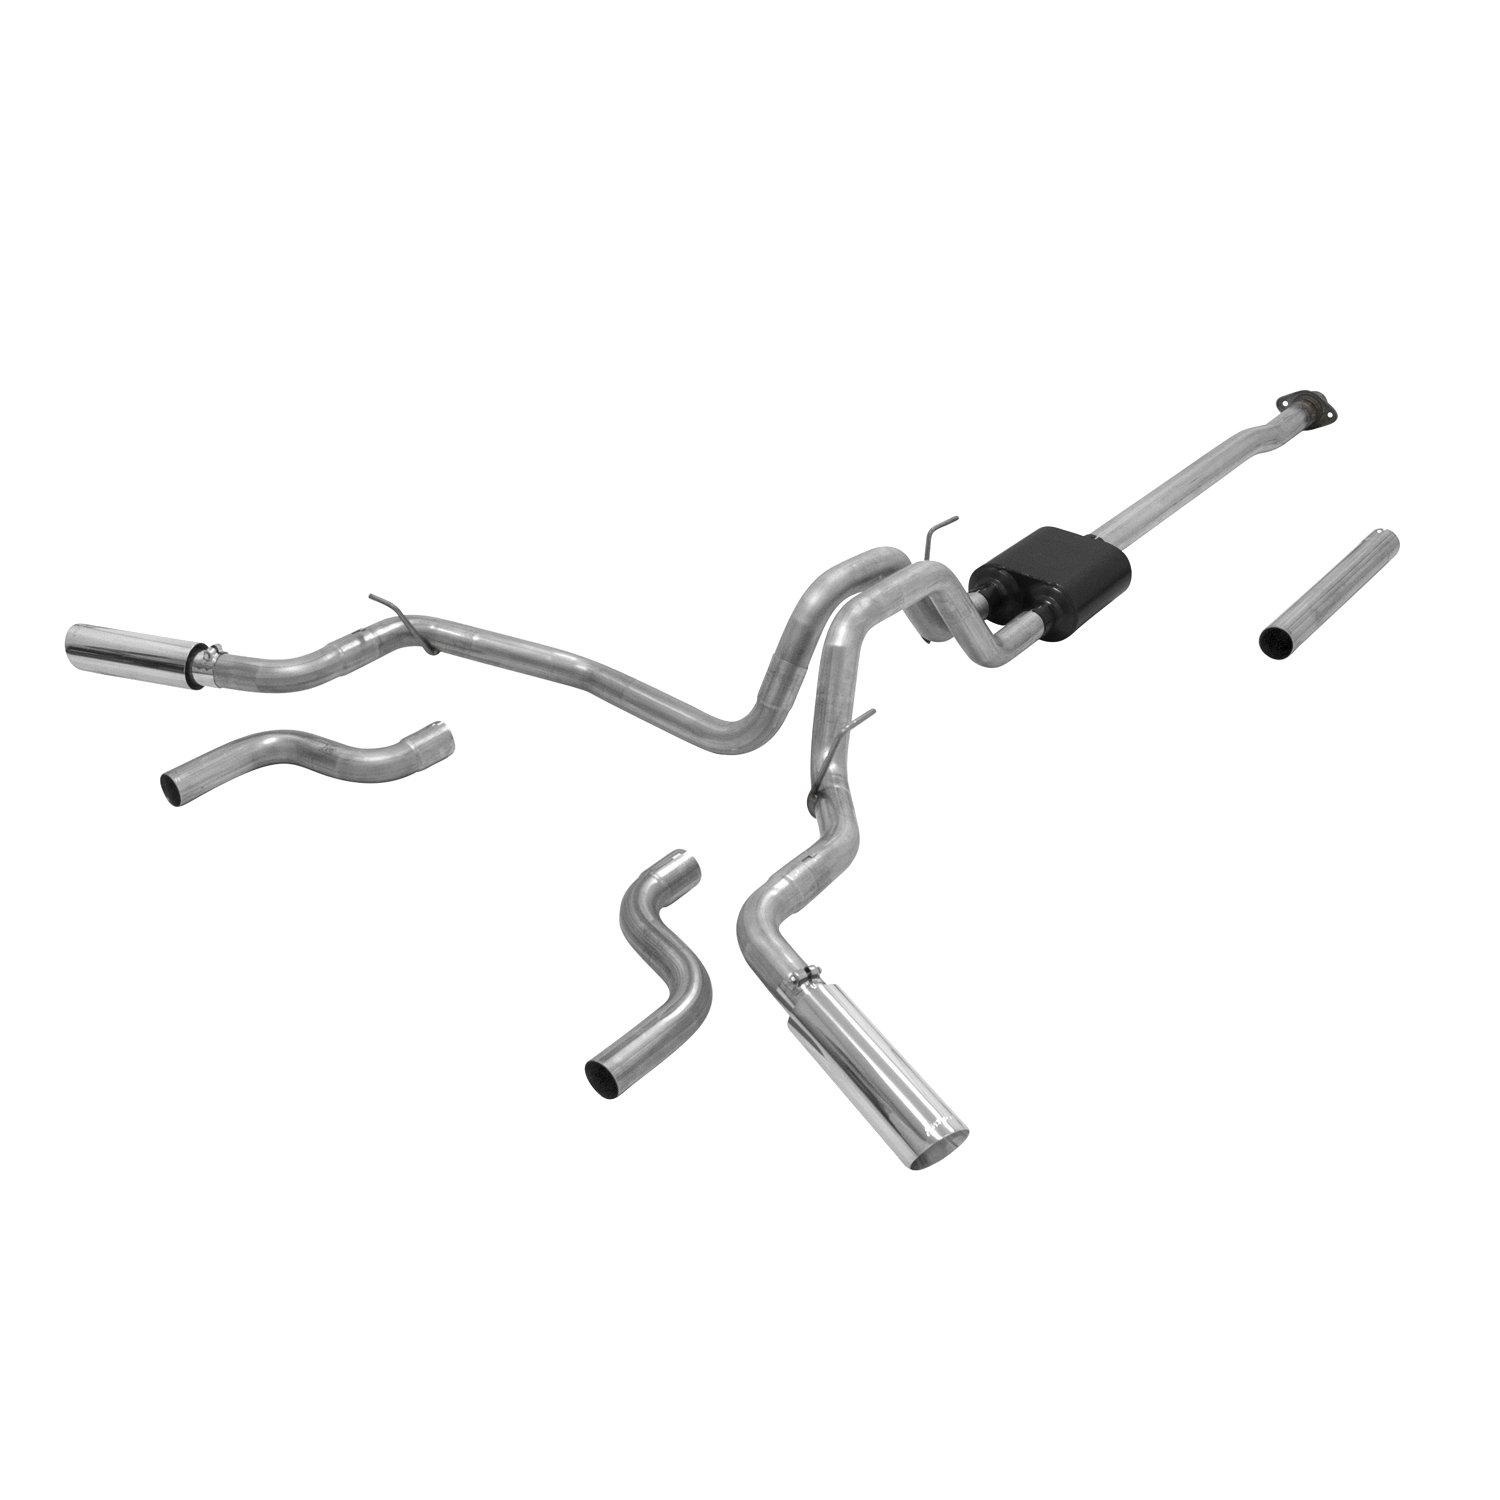 15-16 F150 CAT-BACK EXHAUST SYSTEM